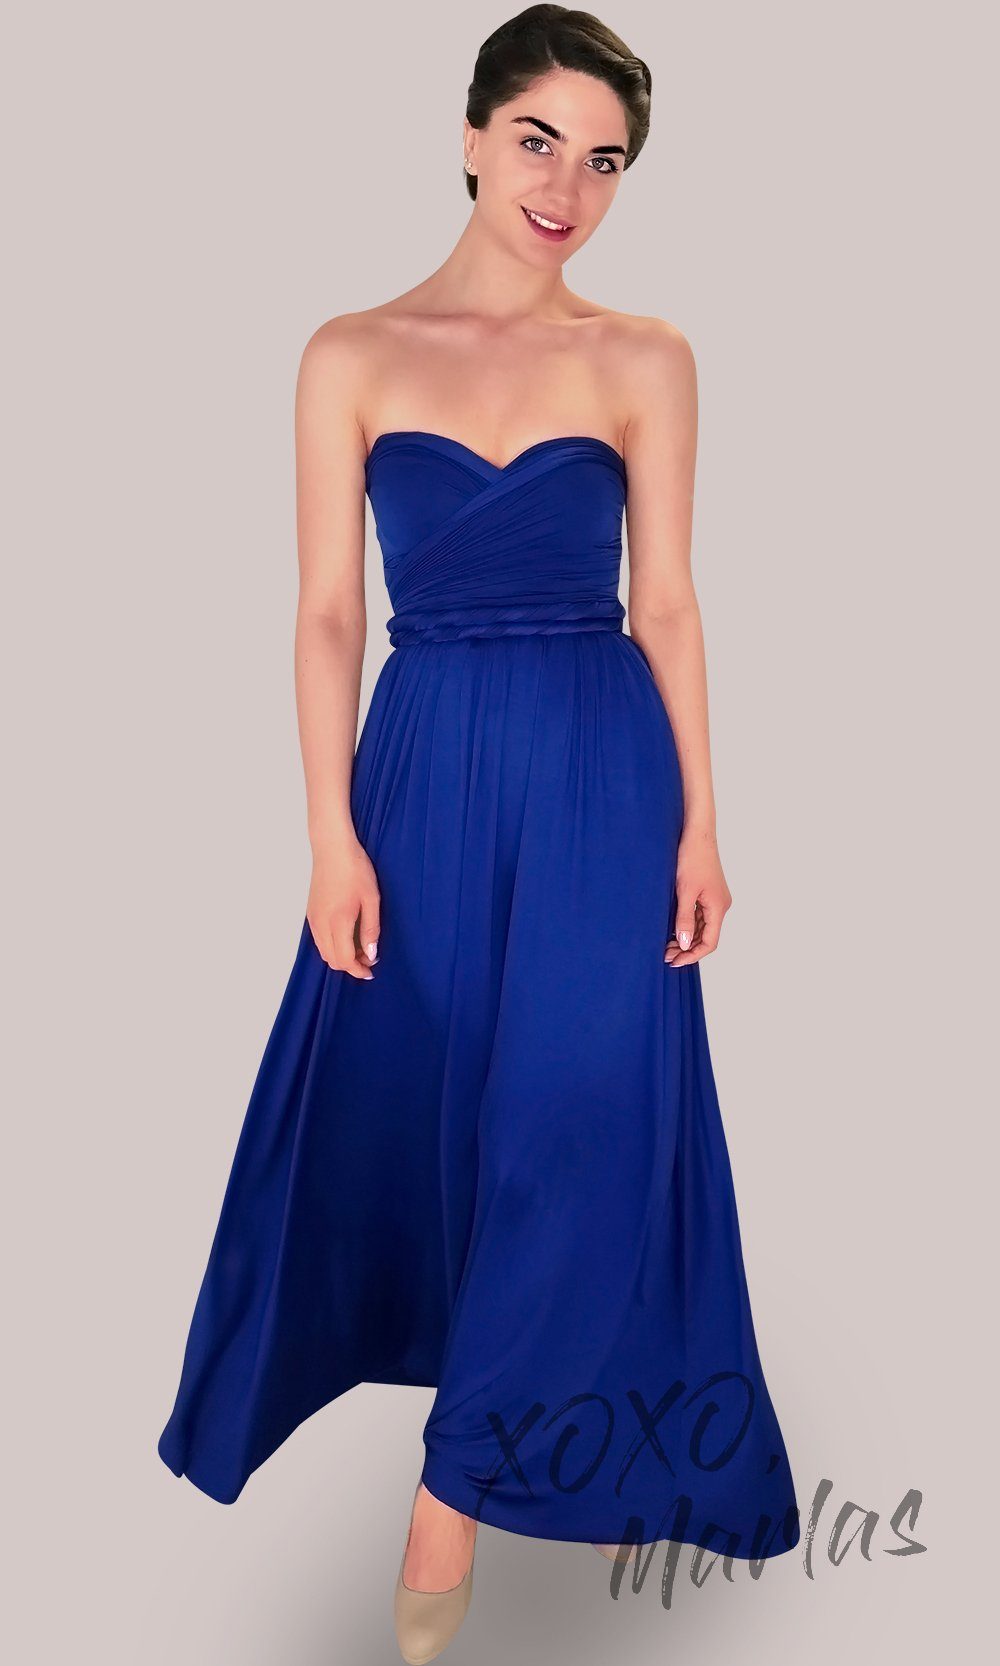 Long royal blue infinity bridesmaid dress or multiway dress or convertible dress.One dress worn in multiple ways.This bright blue one size dress is great for bridesmaid, prom, destination wedding, gala, cheap western party dress, semi formal,cocktail